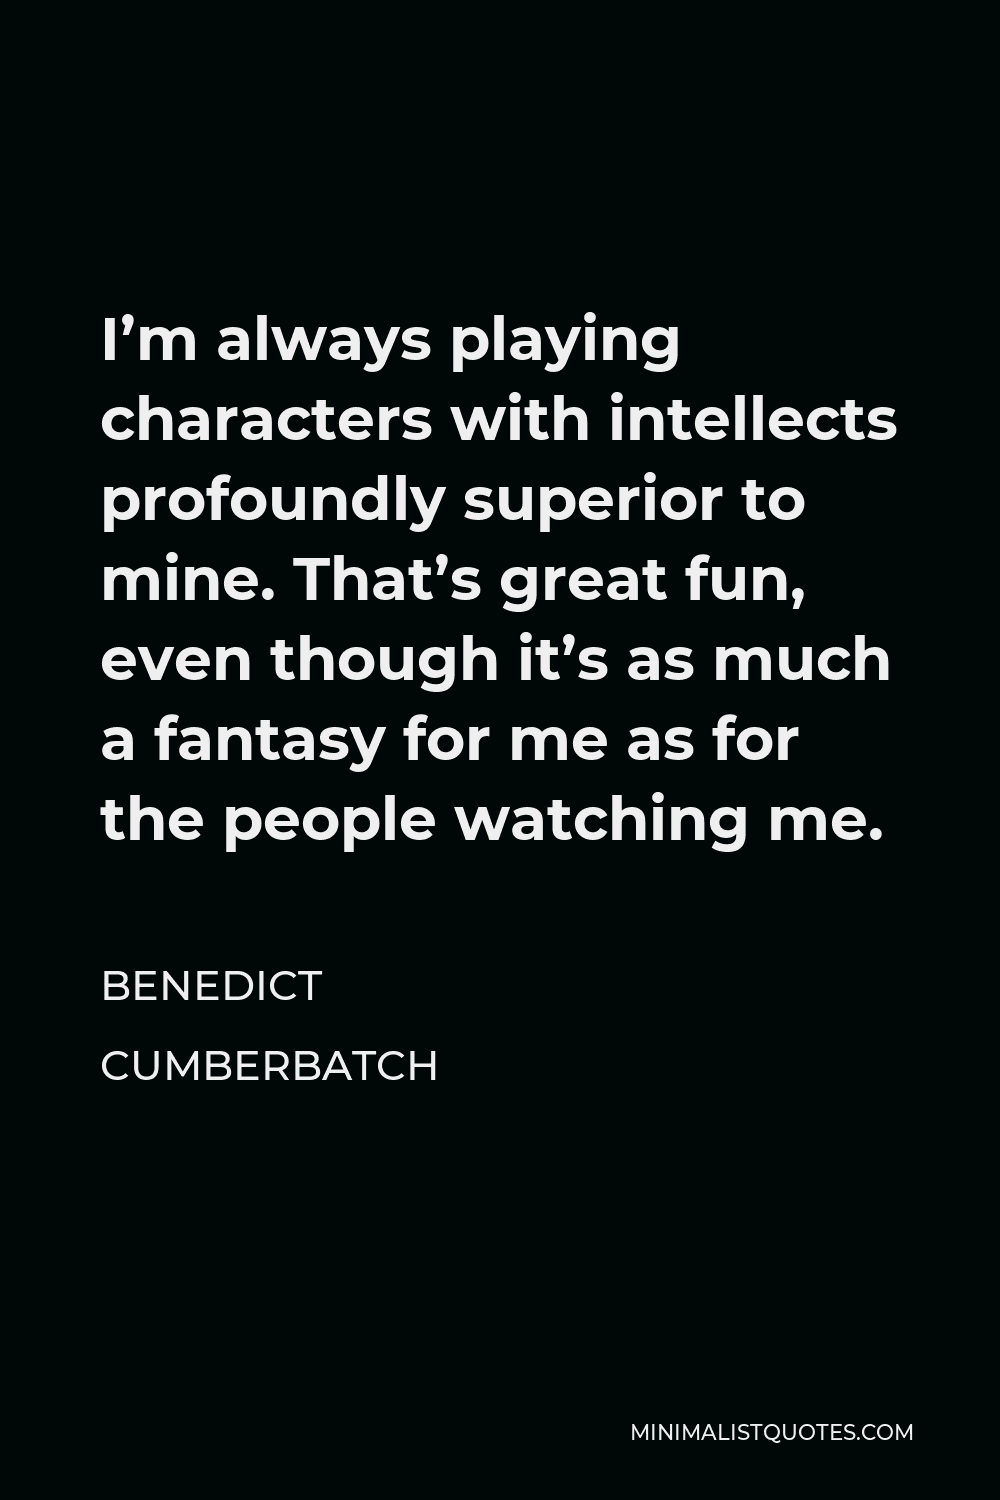 Benedict Cumberbatch Quote - I’m always playing characters with intellects profoundly superior to mine. That’s great fun, even though it’s as much a fantasy for me as for the people watching me.